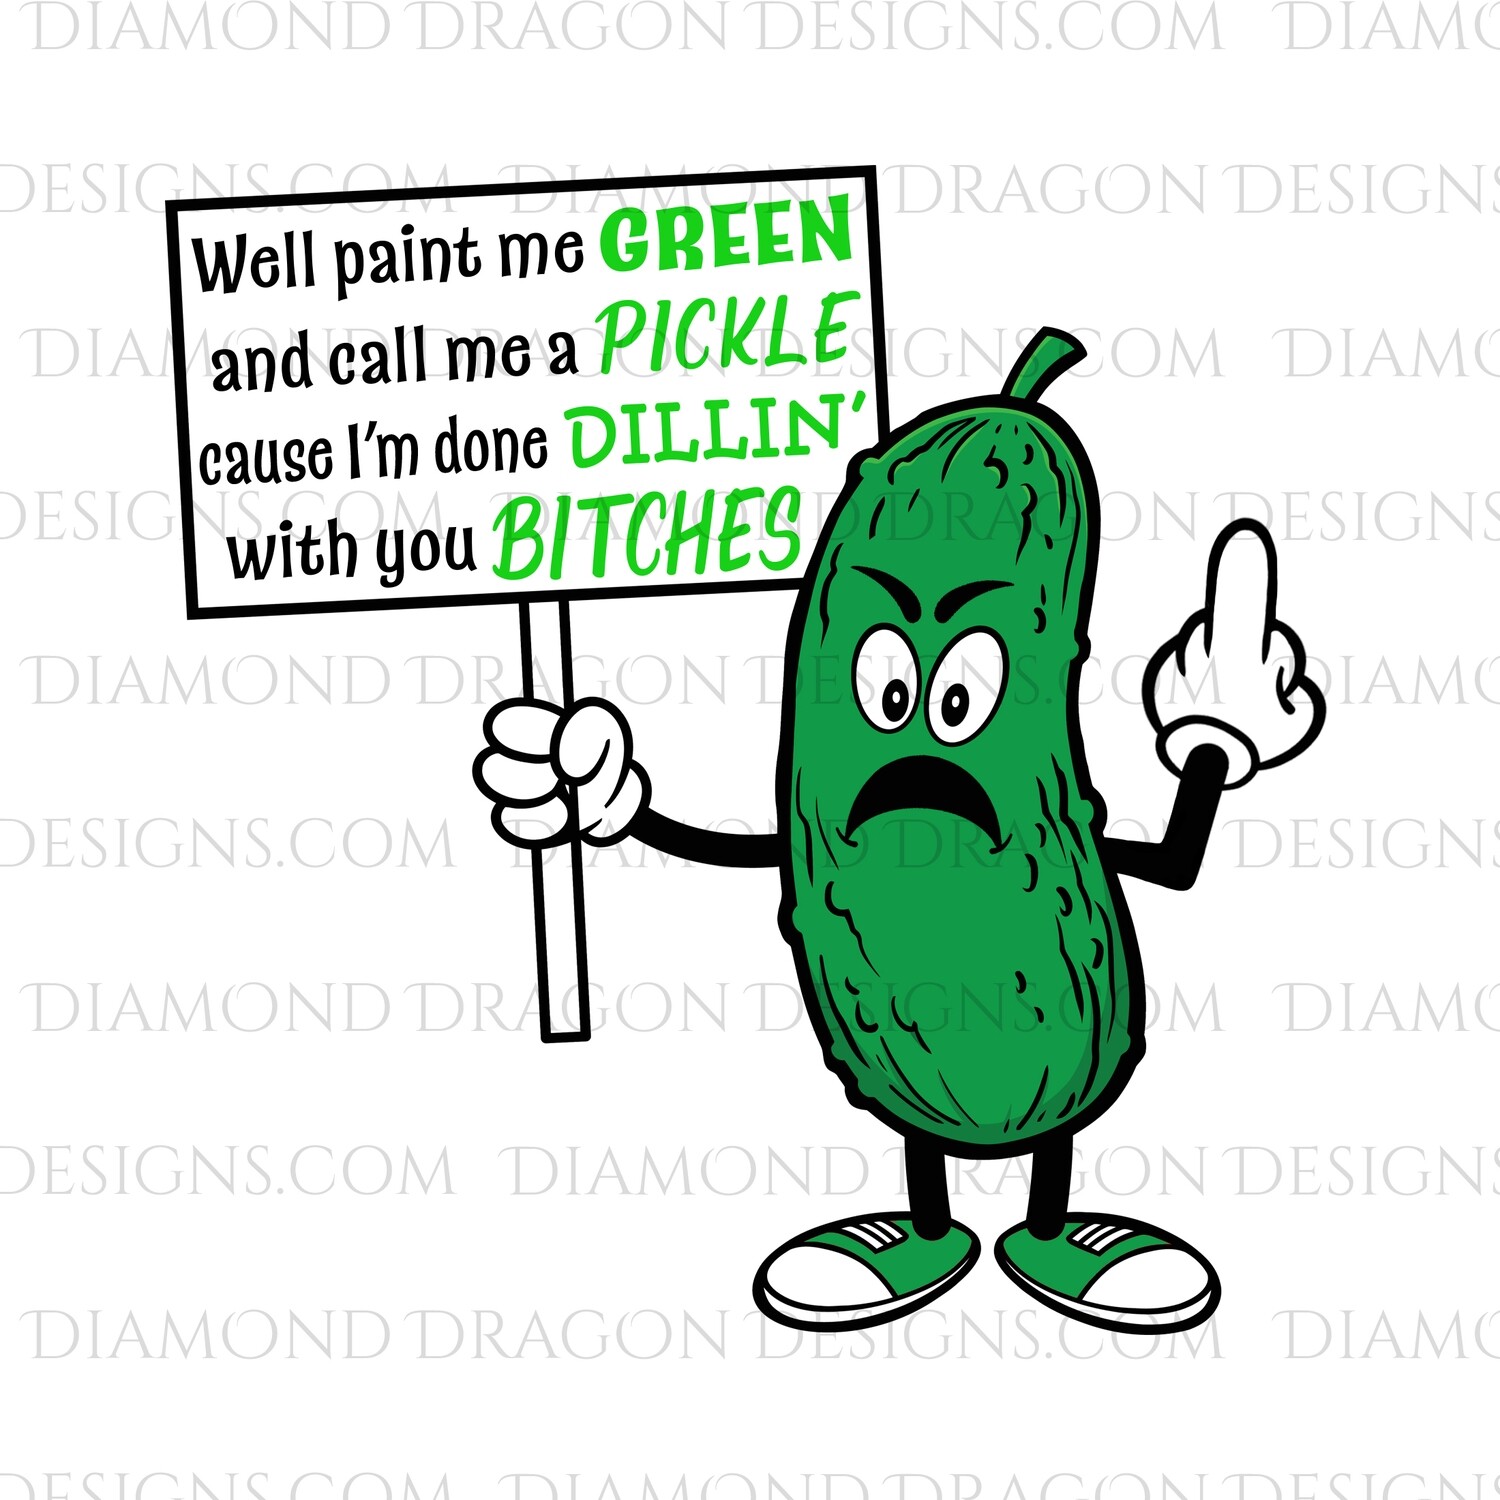 Quotes - Well Paint Me Green. And Call Me a Pickle, I'm Done Dillin', Quote, Waterslide